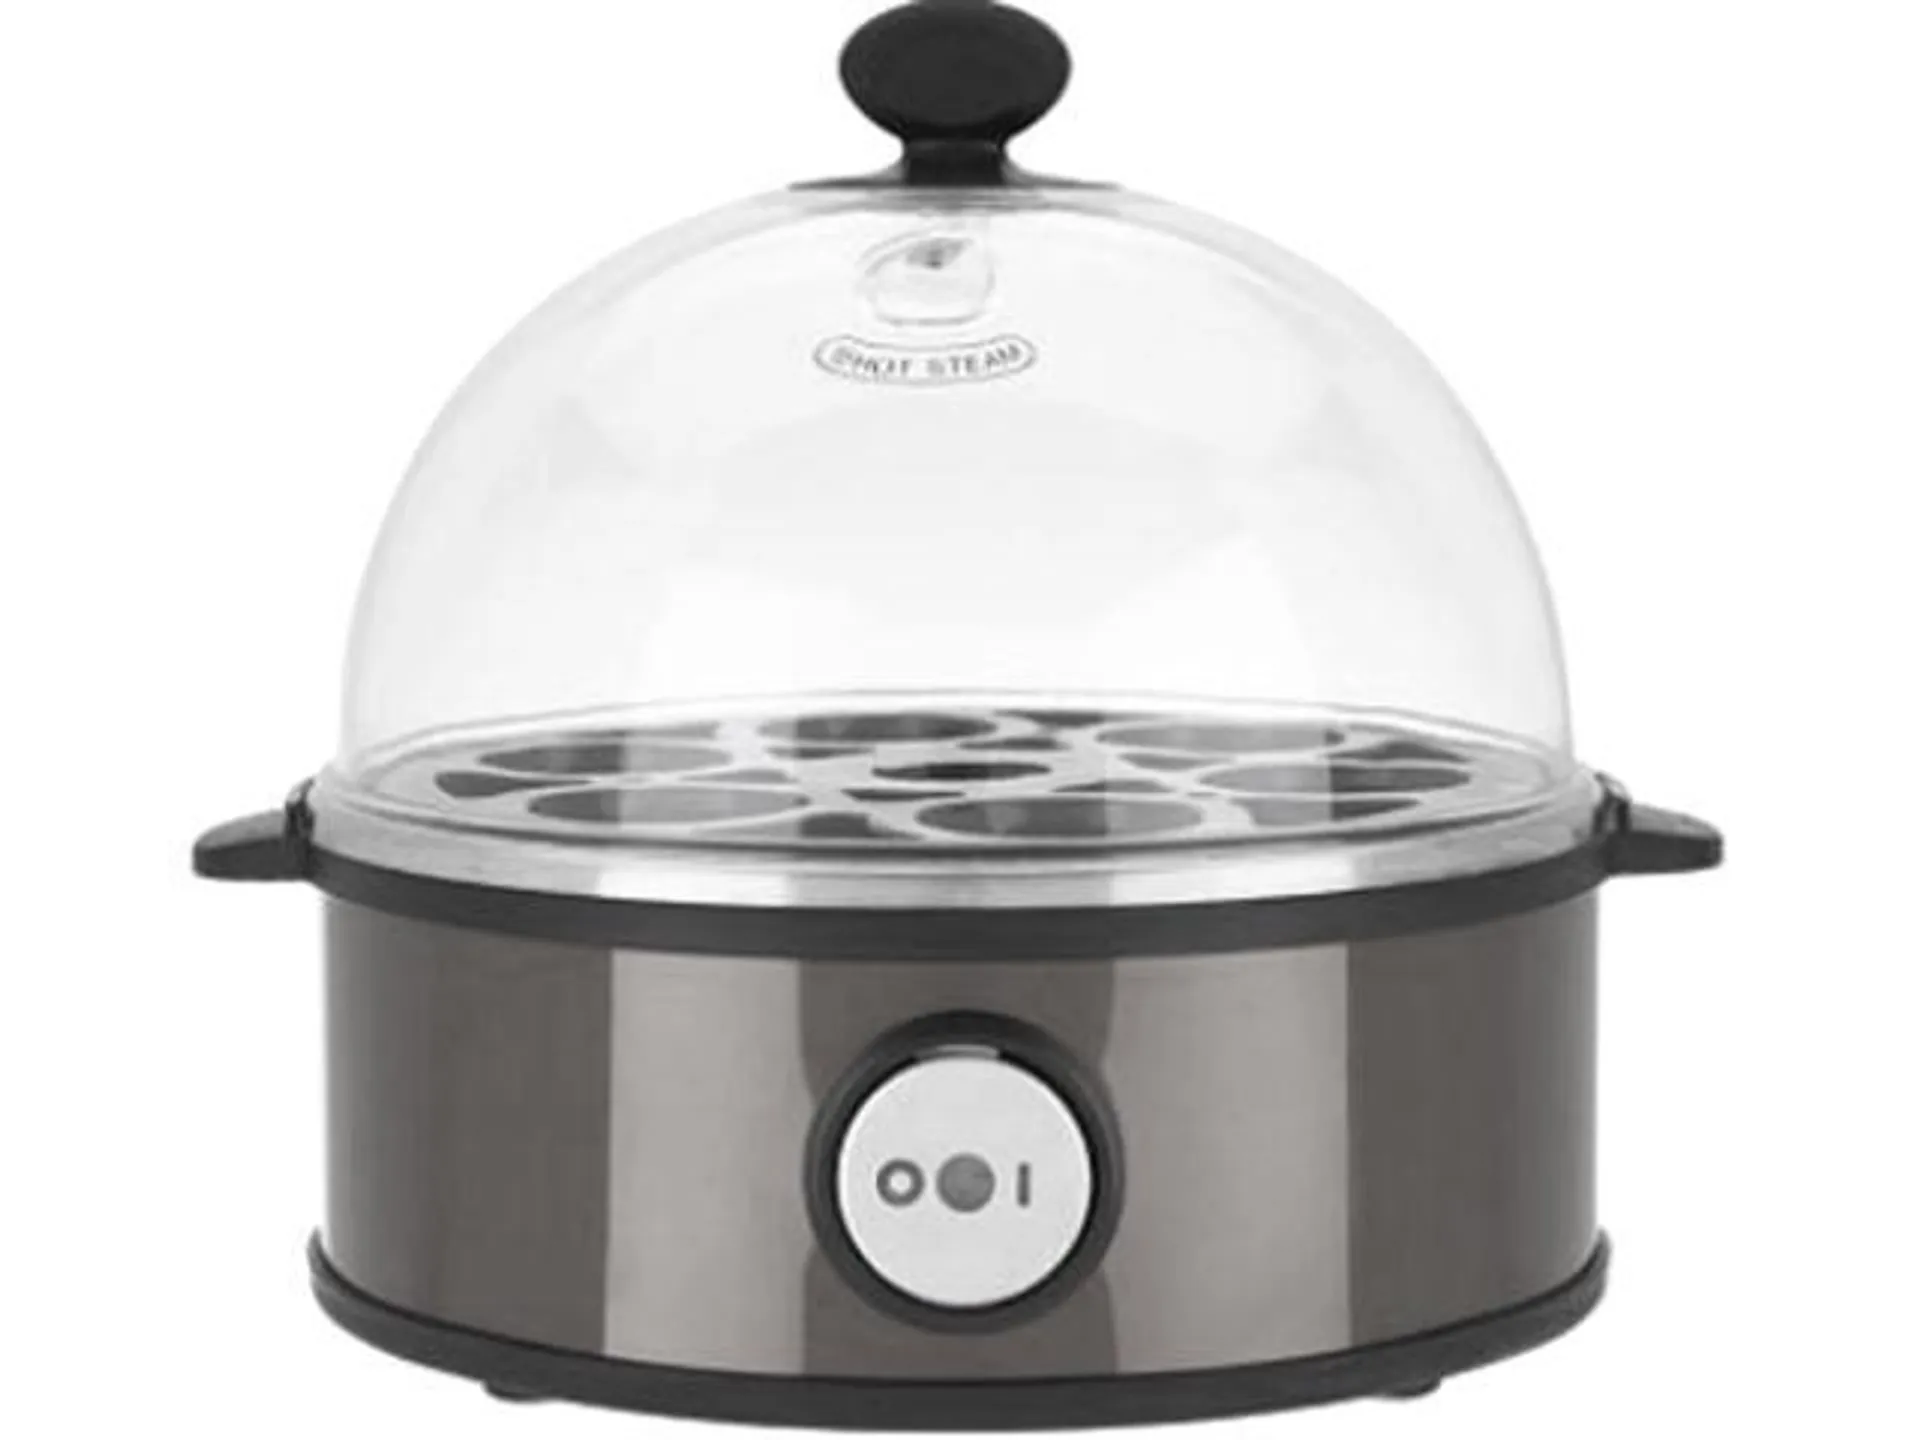 Dash K46776 Series Express 6-Egg Stainless Steel Egg Cooker and Poacher, Stainless Steel